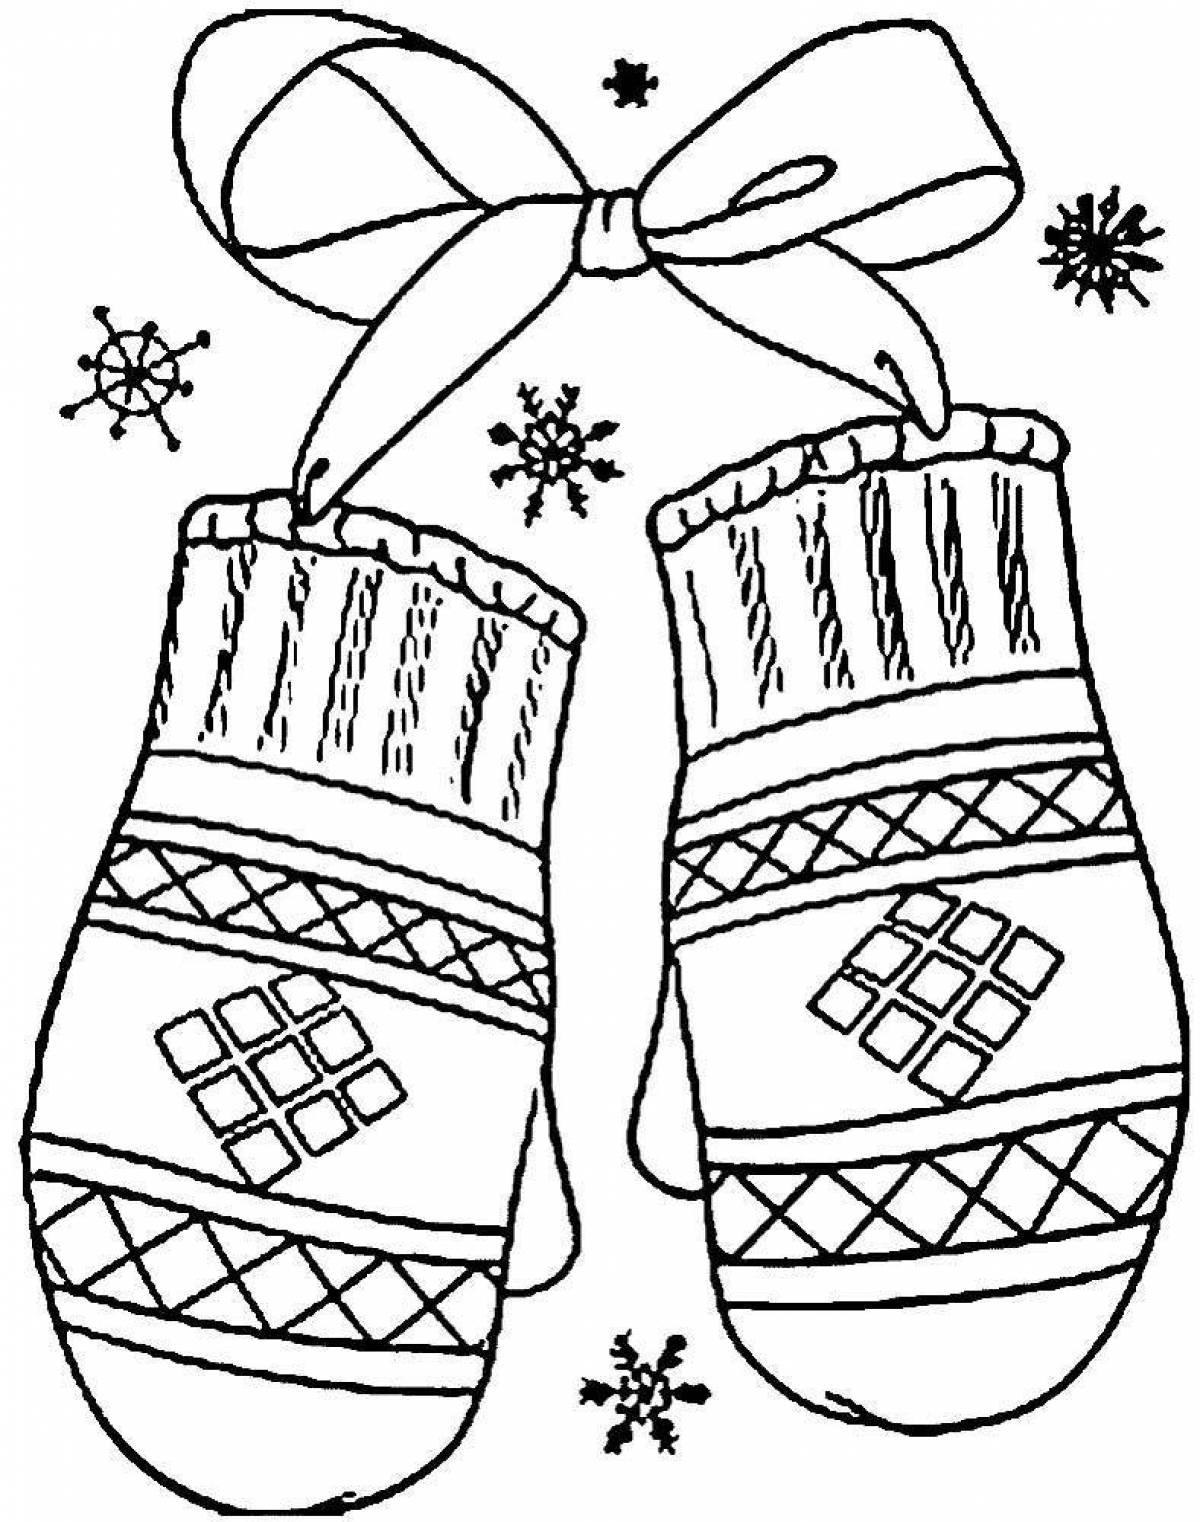 Amazing coloring mittens for 3-4 year olds